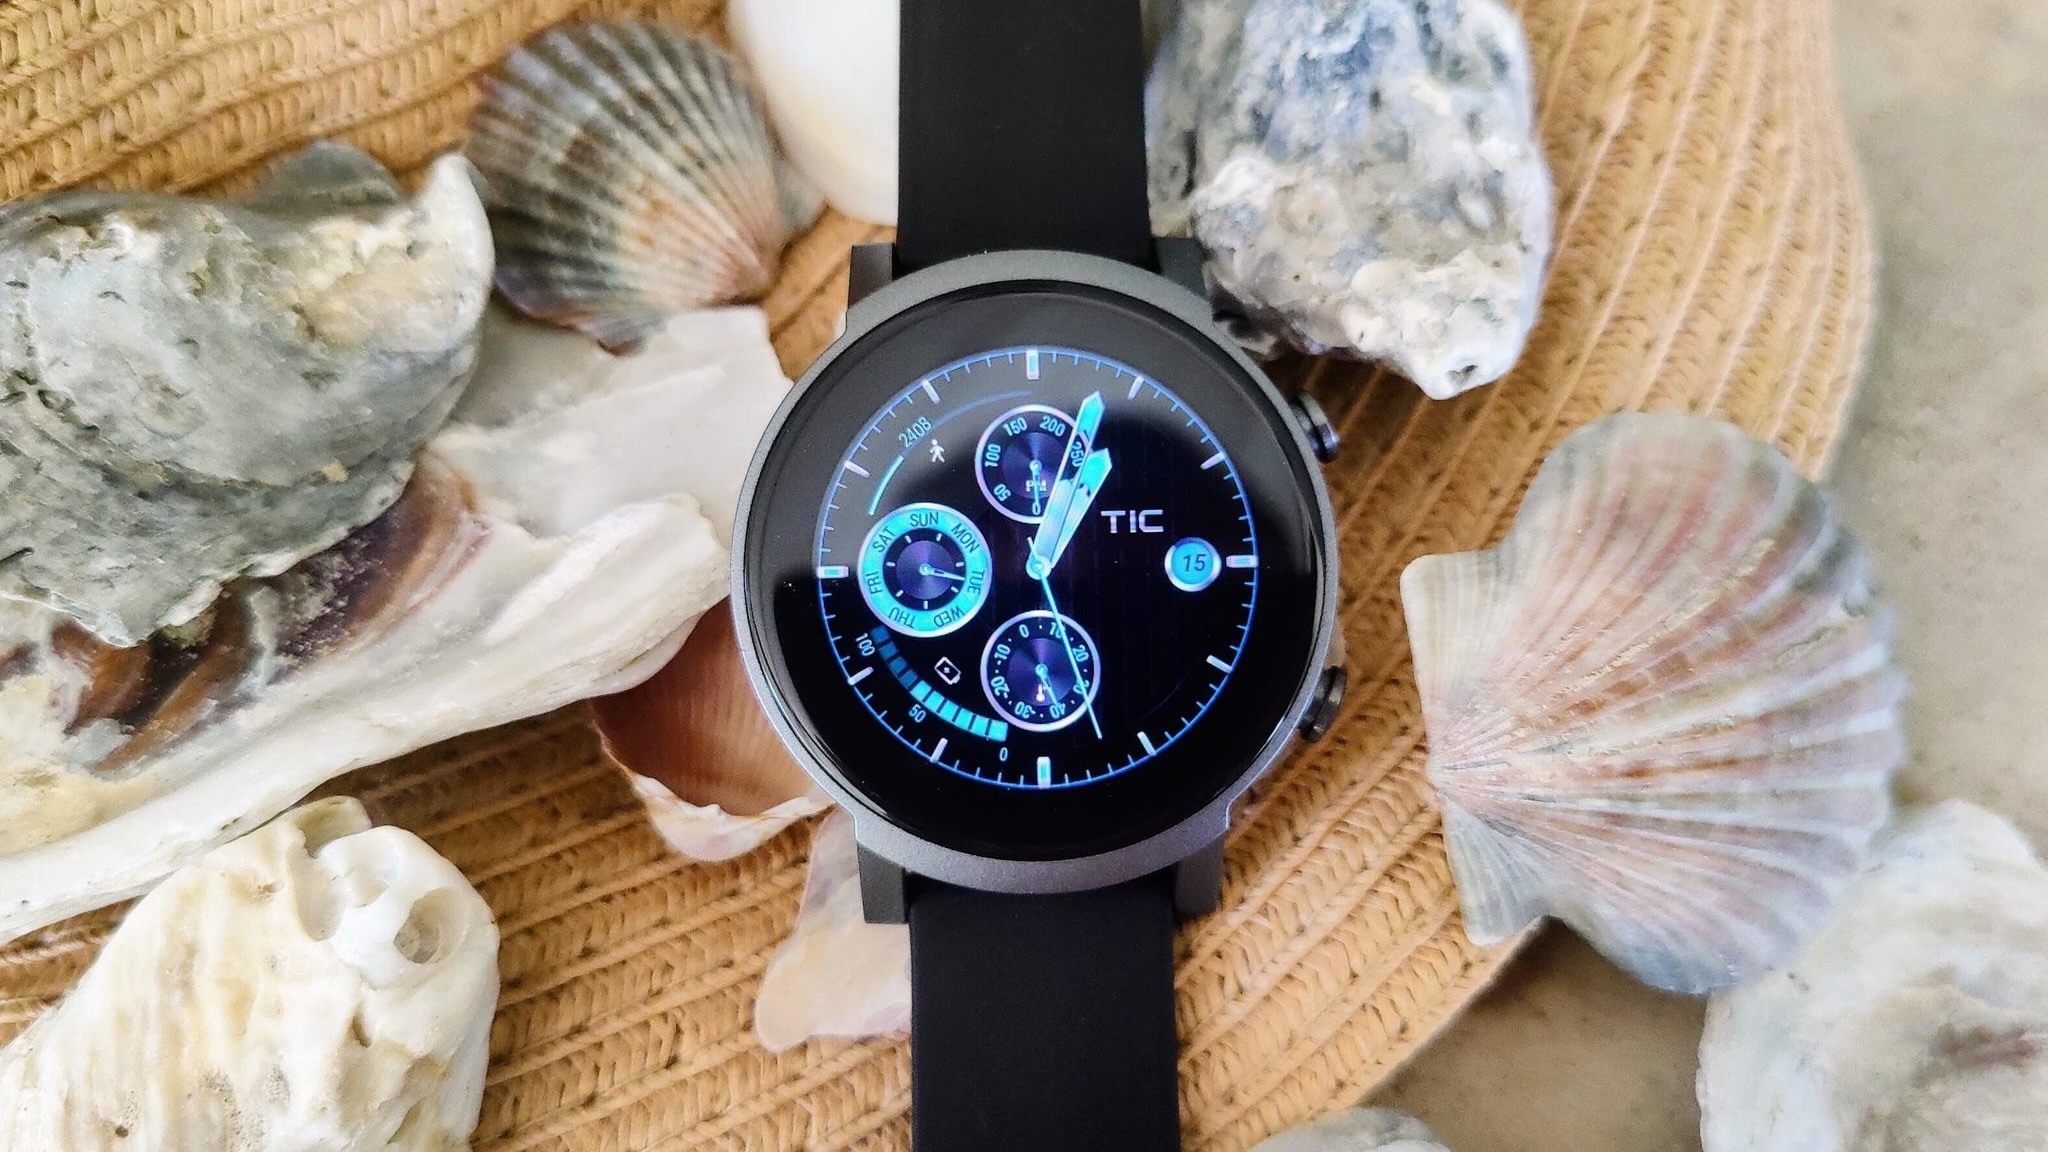 This Wear OS smartwatch has no business being this cheap